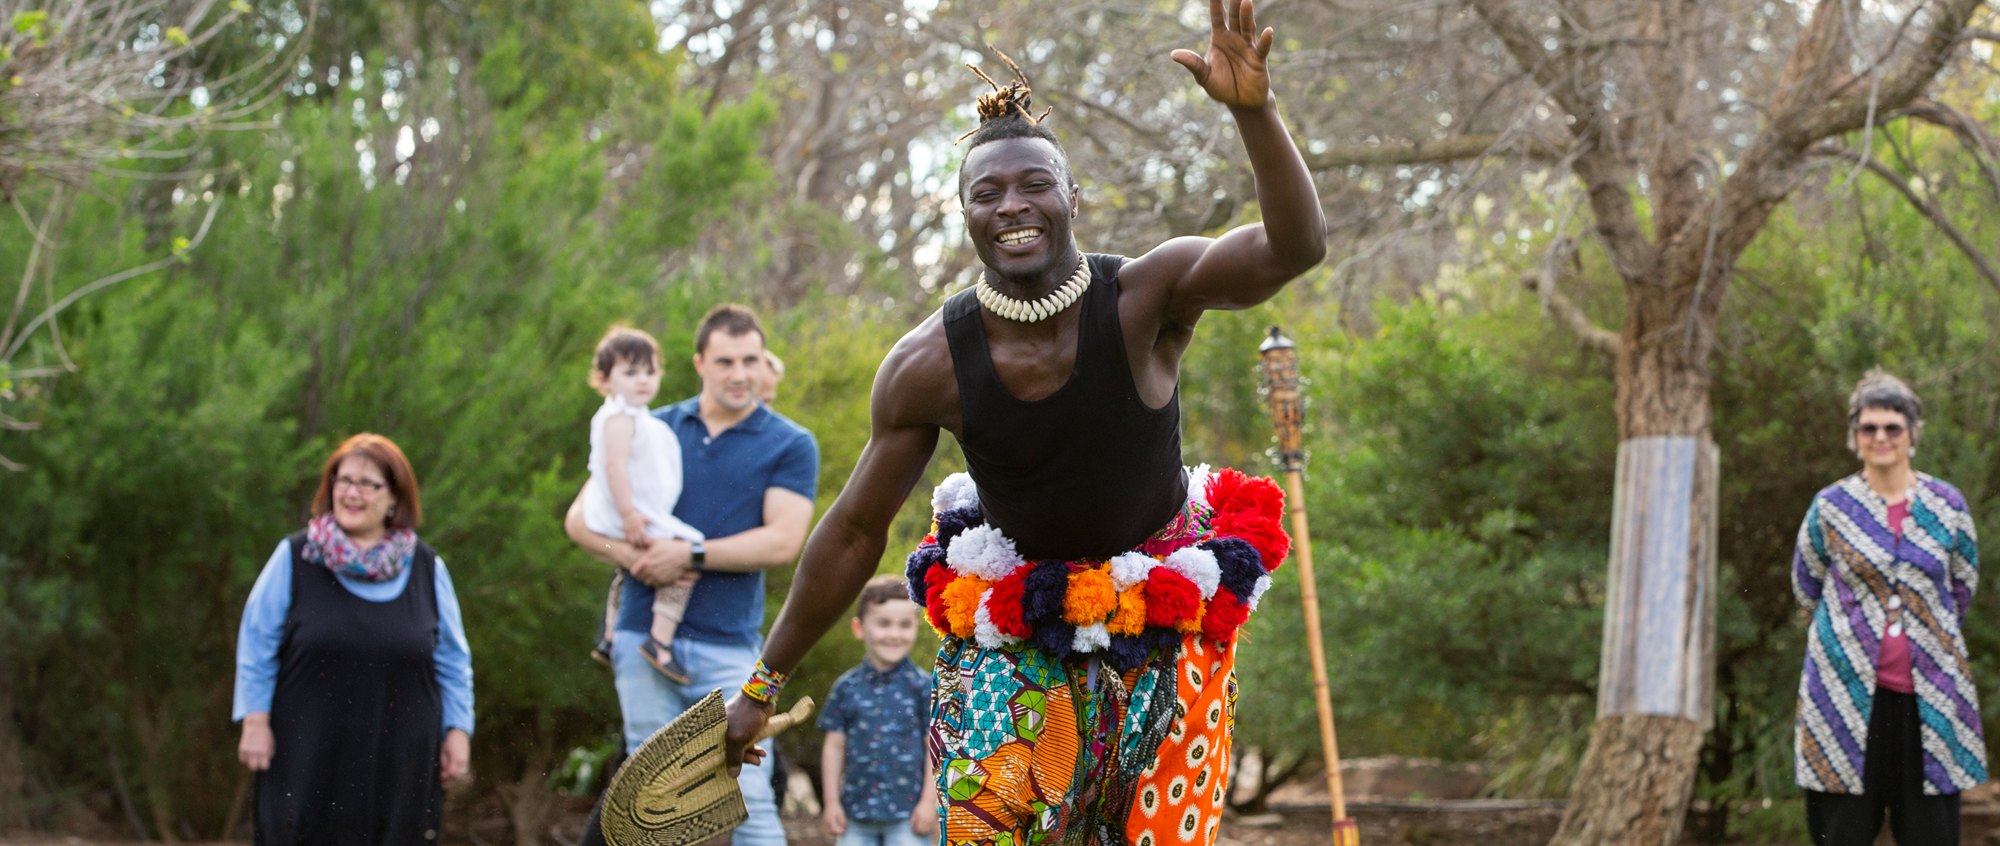 An African dancer, looking to the camera with a spade in his right hand, while five guests watch on from behind.